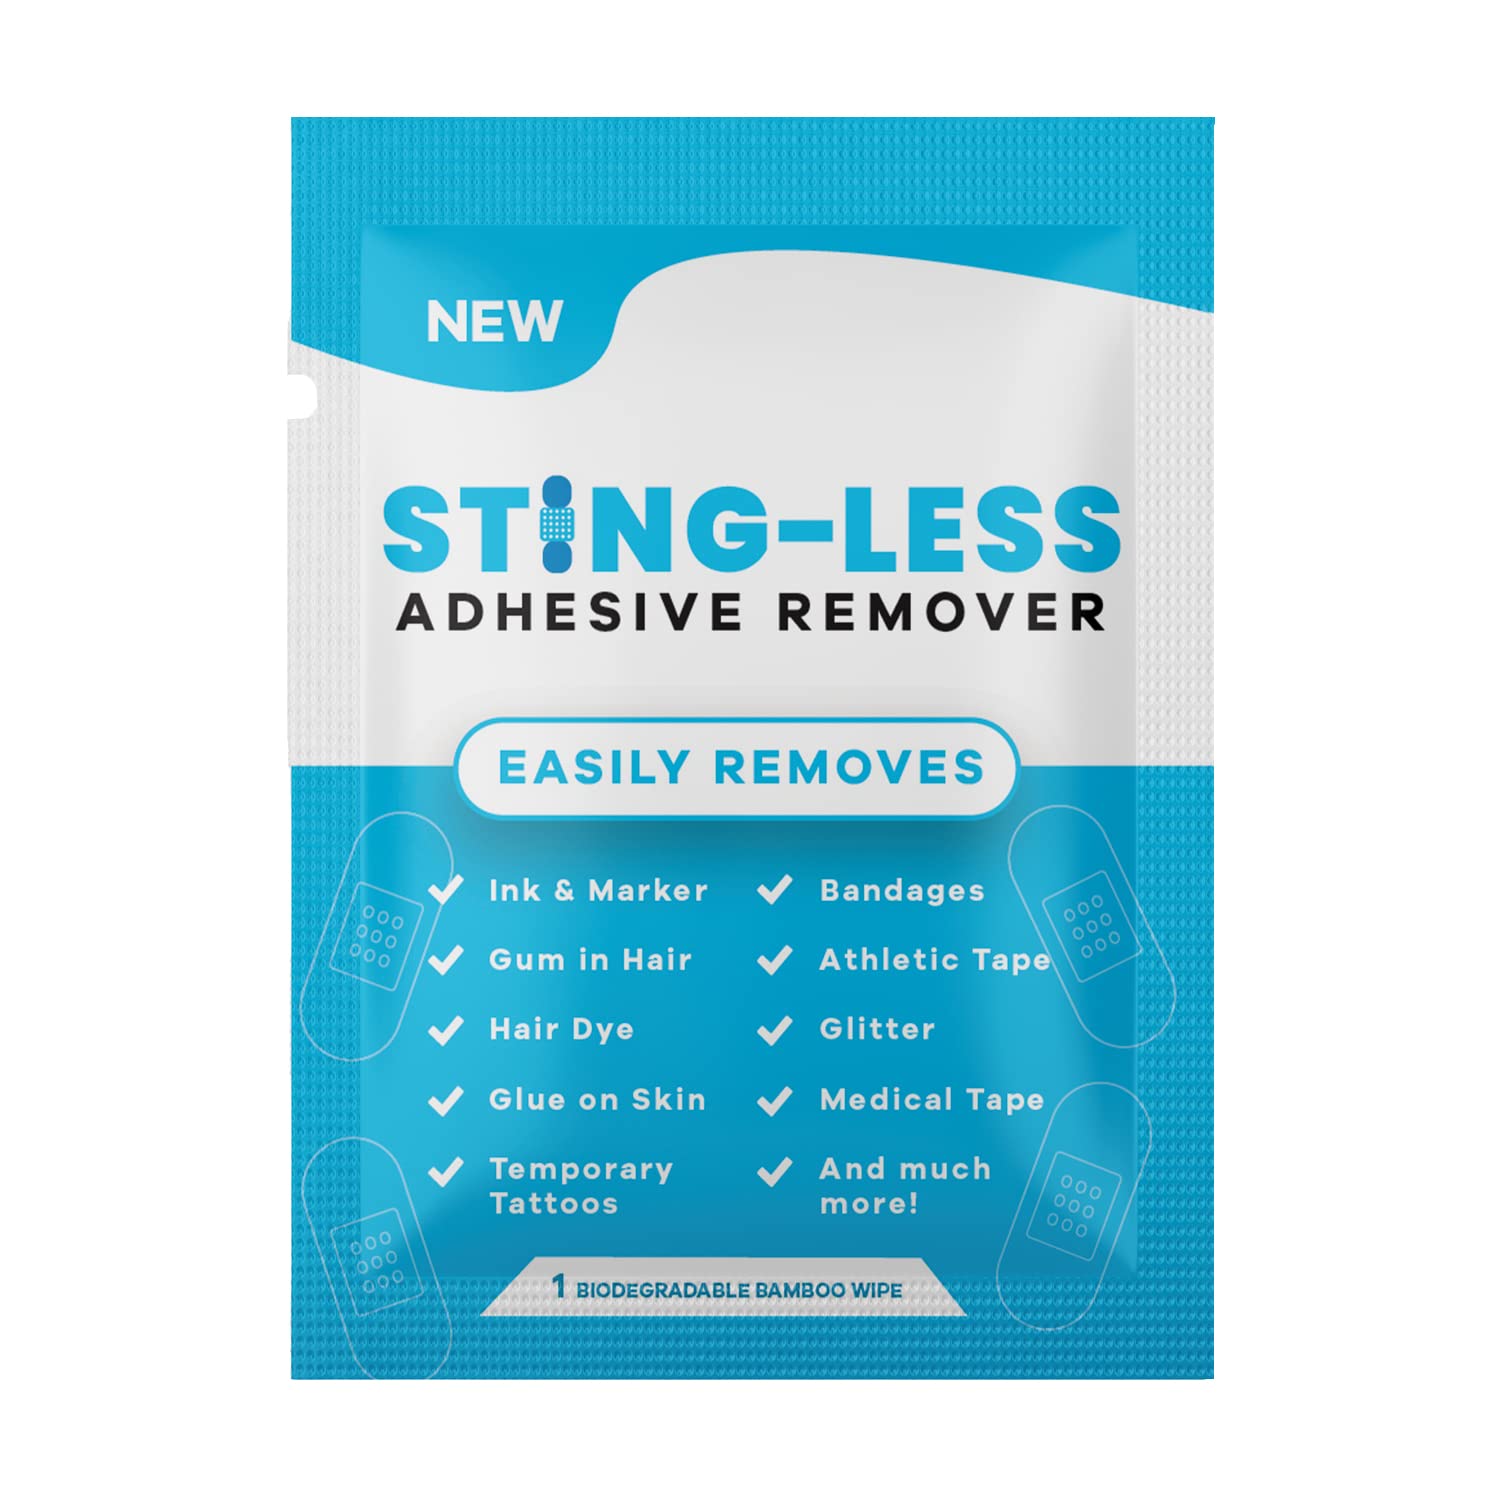 New Sting-Less Adhesive Remover Wipes | Bandage Adhesive Remover for Skin | Medical Adhesive Remover Wipes | Removes Bandages, Medical Tape, & Skin